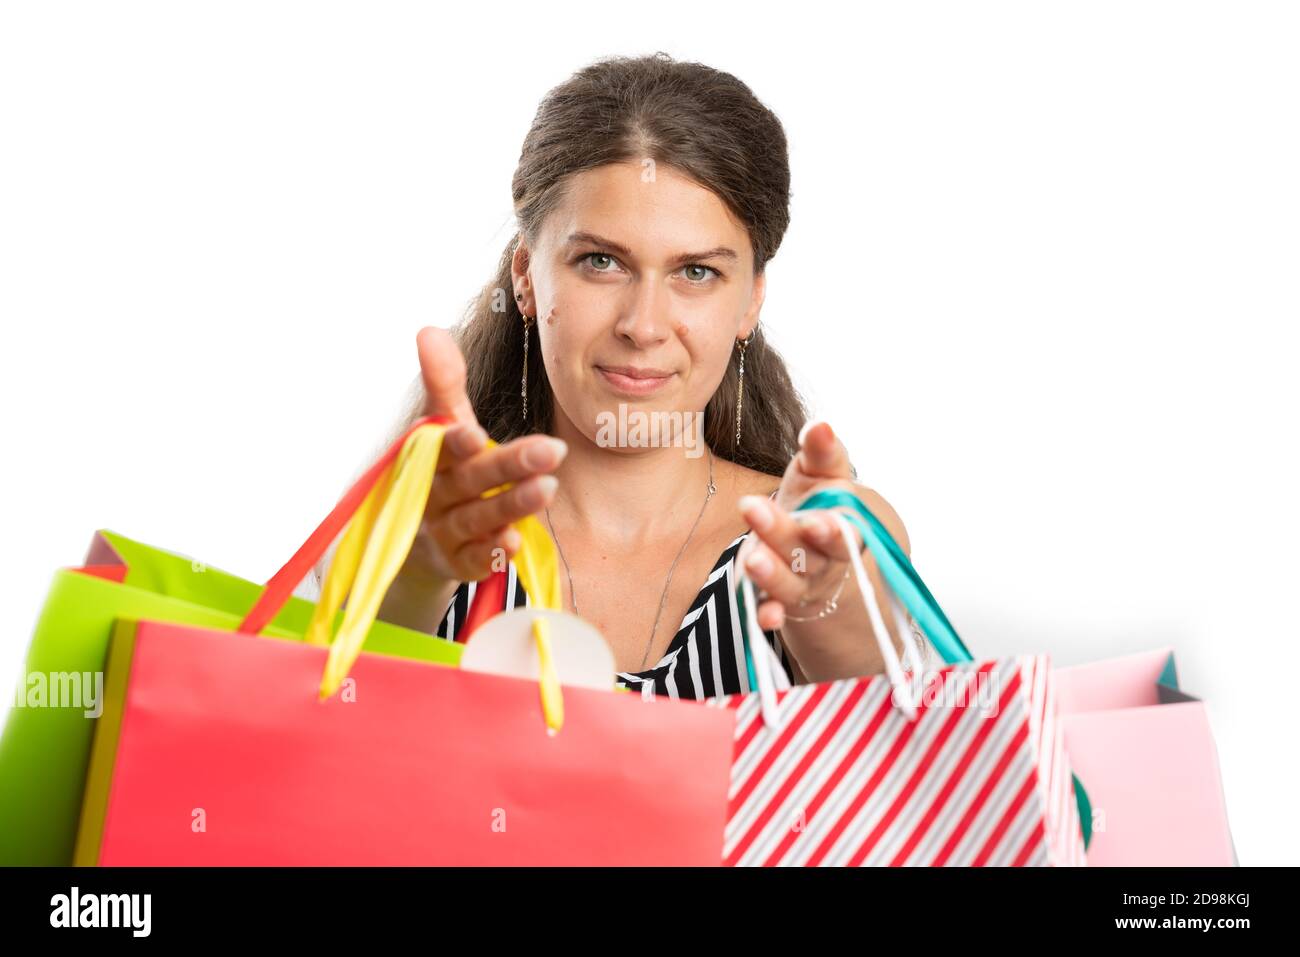 Close-up of female shopaholic adult model smiling offering shopping bags to camera as gift gesture isolated on white studio background Stock Photo